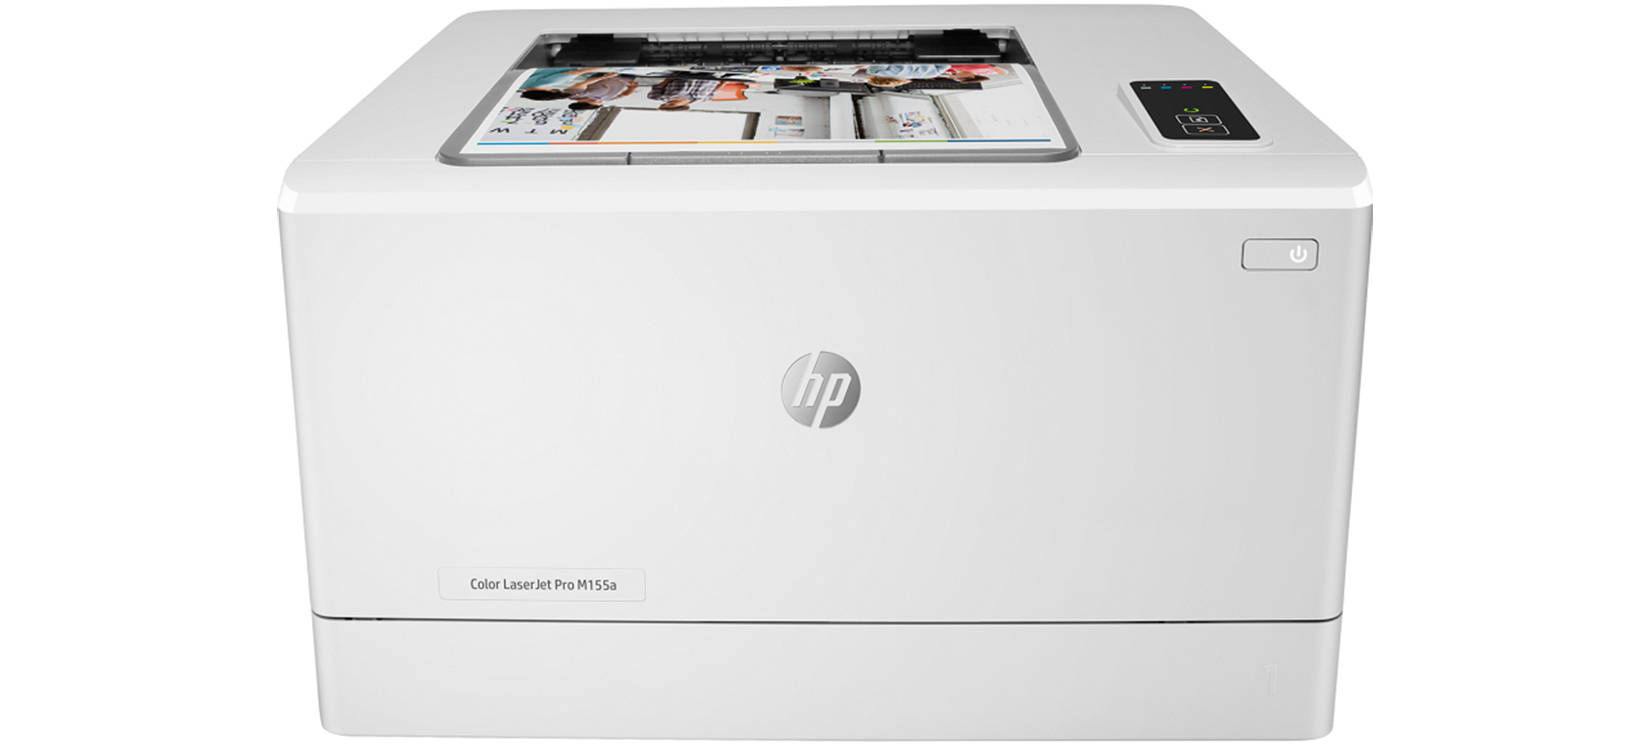 54966_may-in-mau-hp-color-laserjet-pro-m